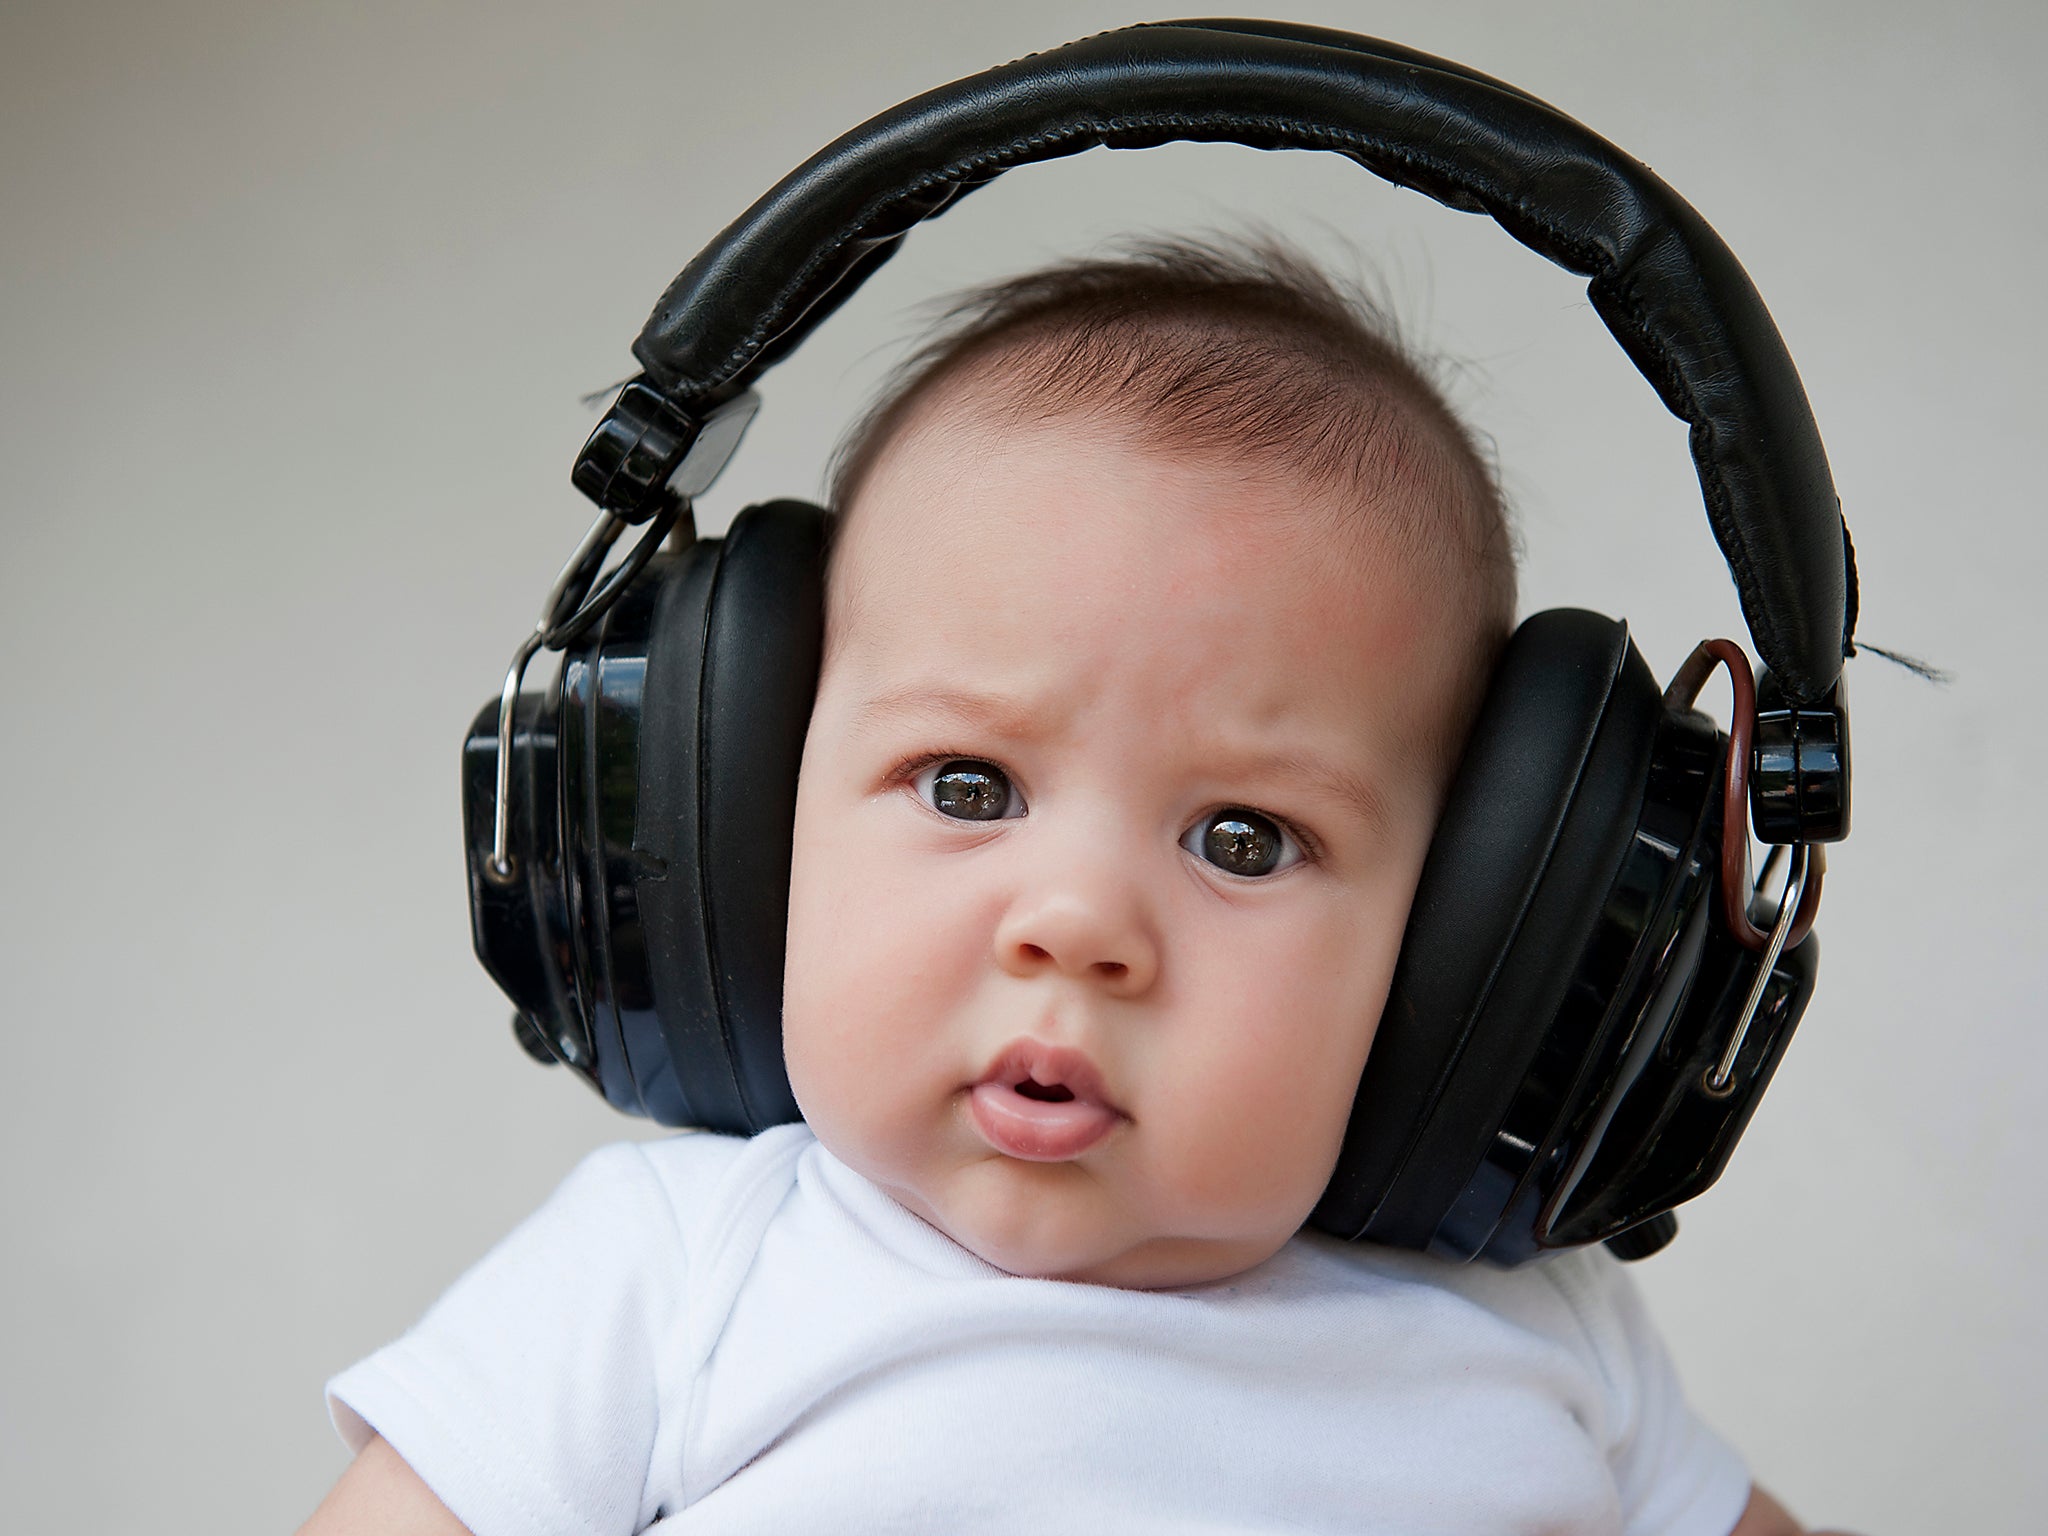 A baby listens to music through headphones